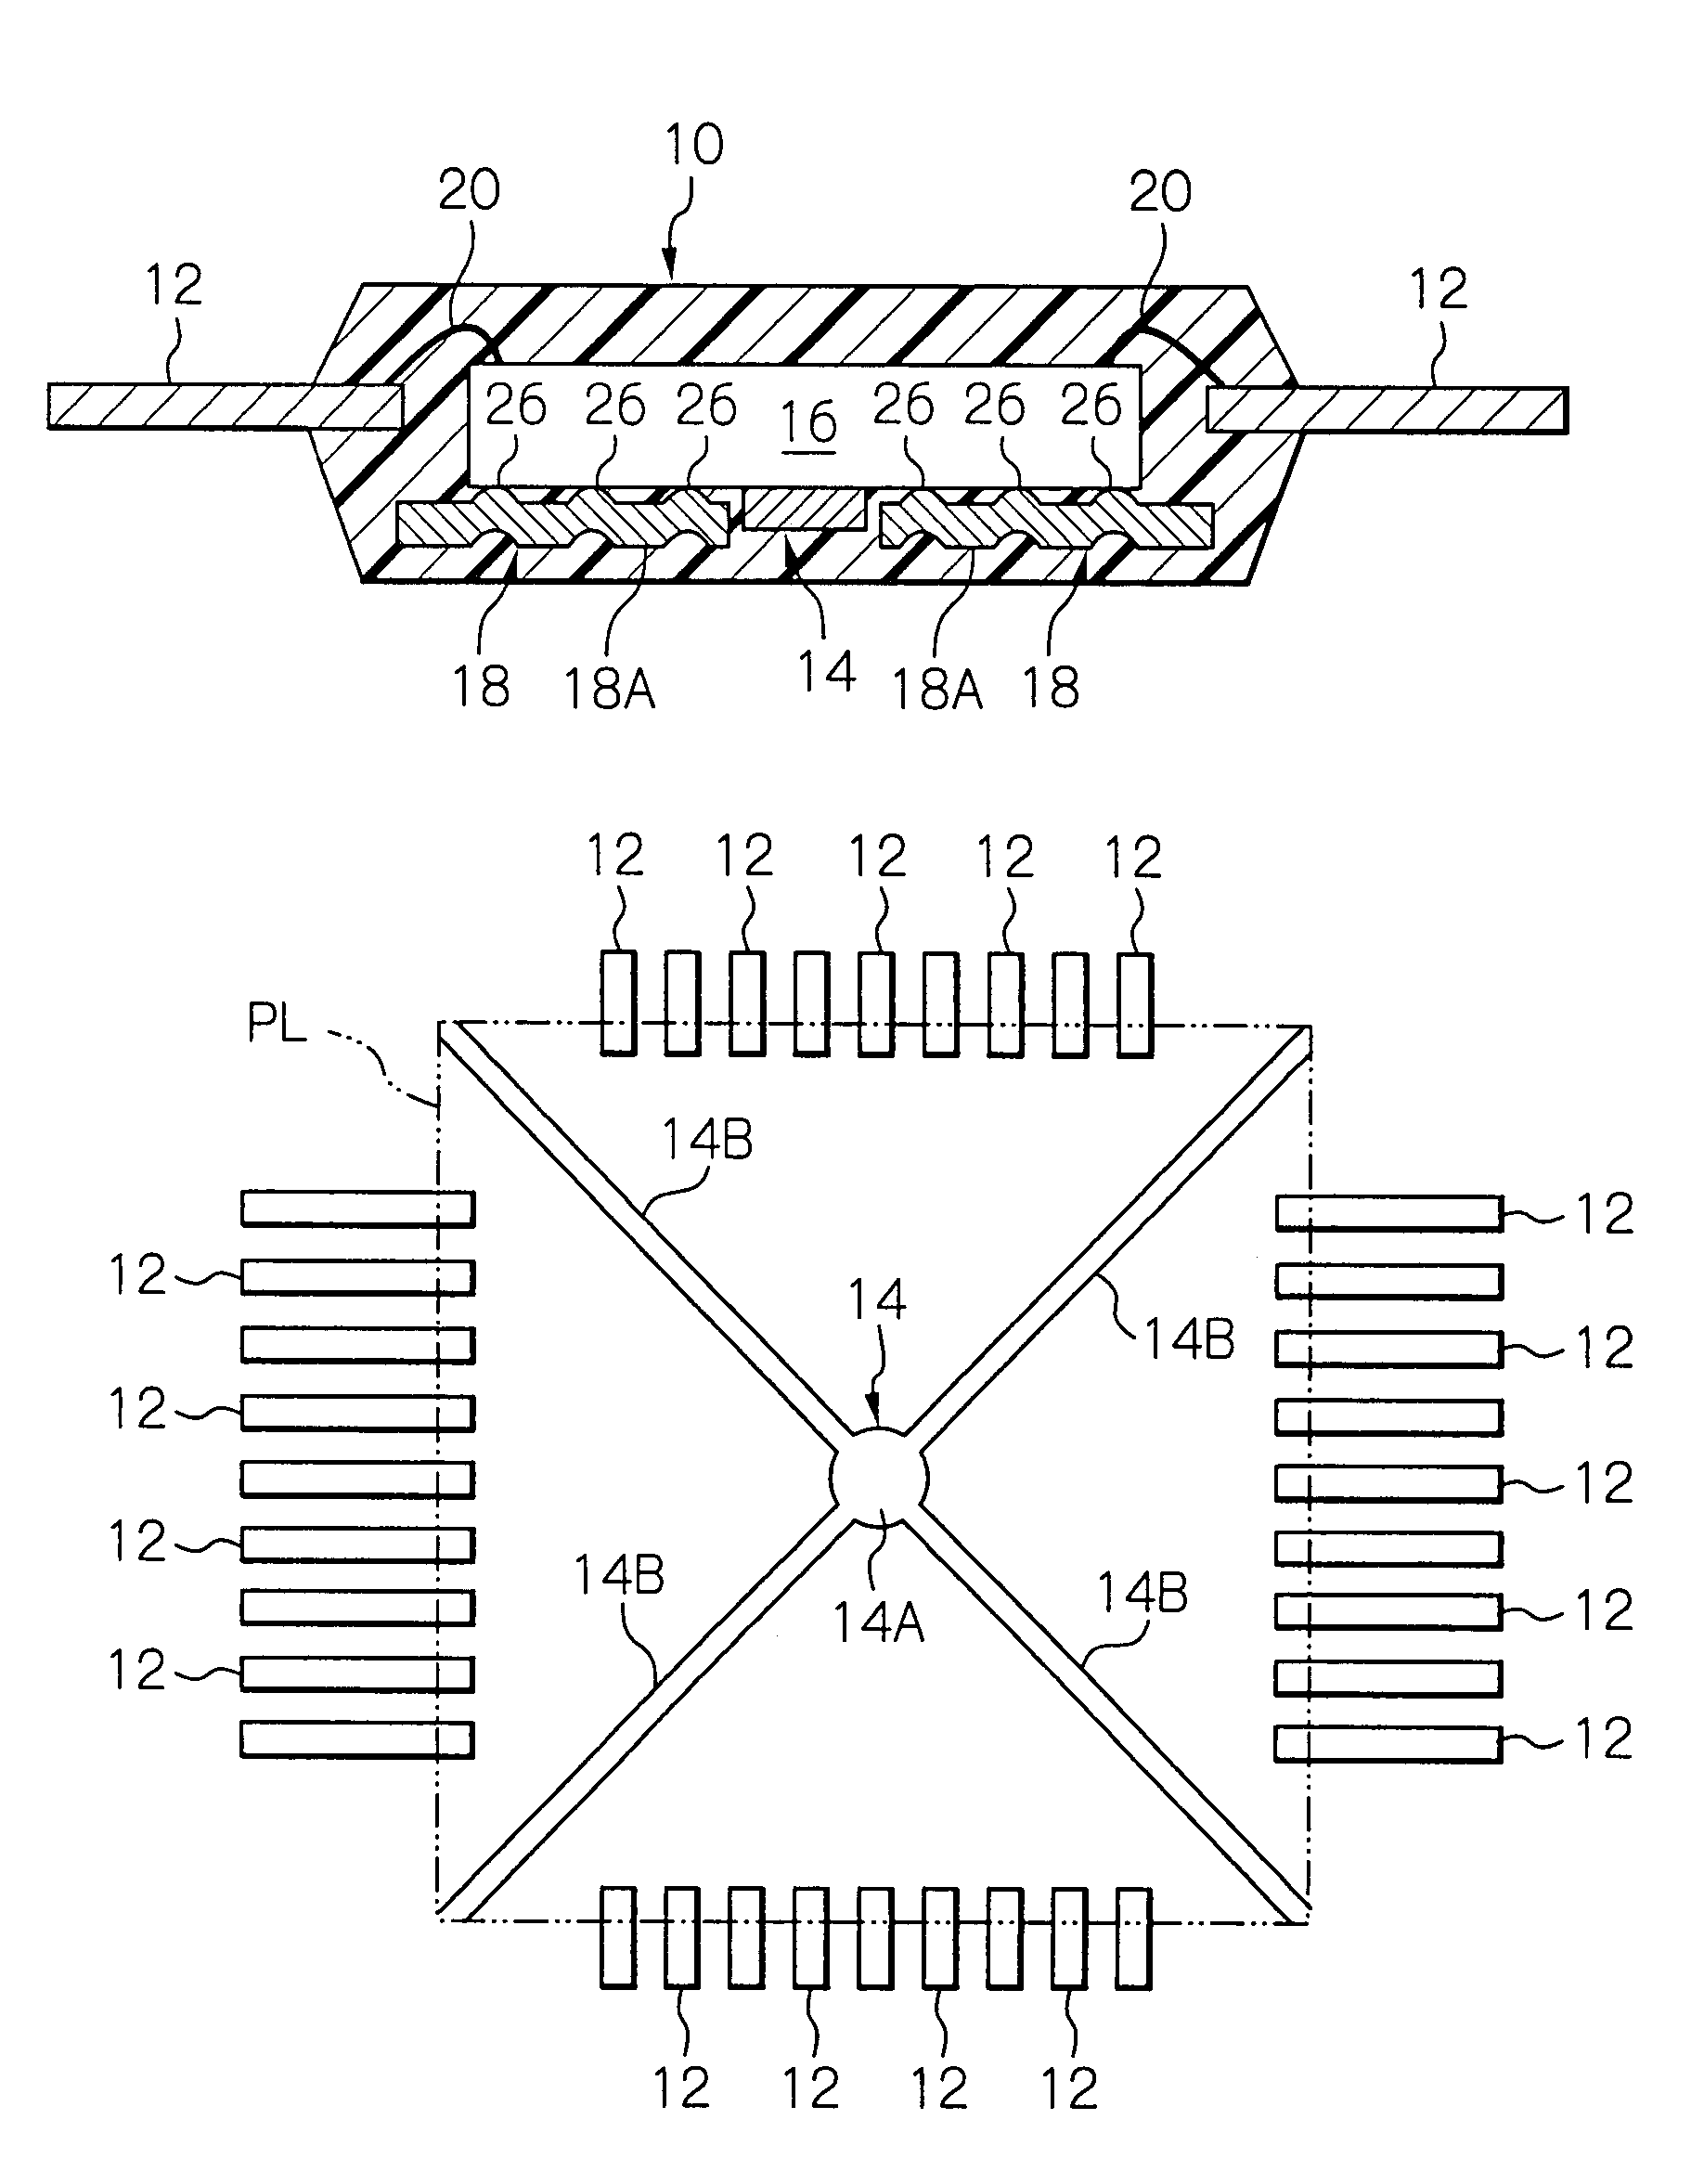 Resin-sealed-type semiconductor device, and production process for producing such semiconductor device